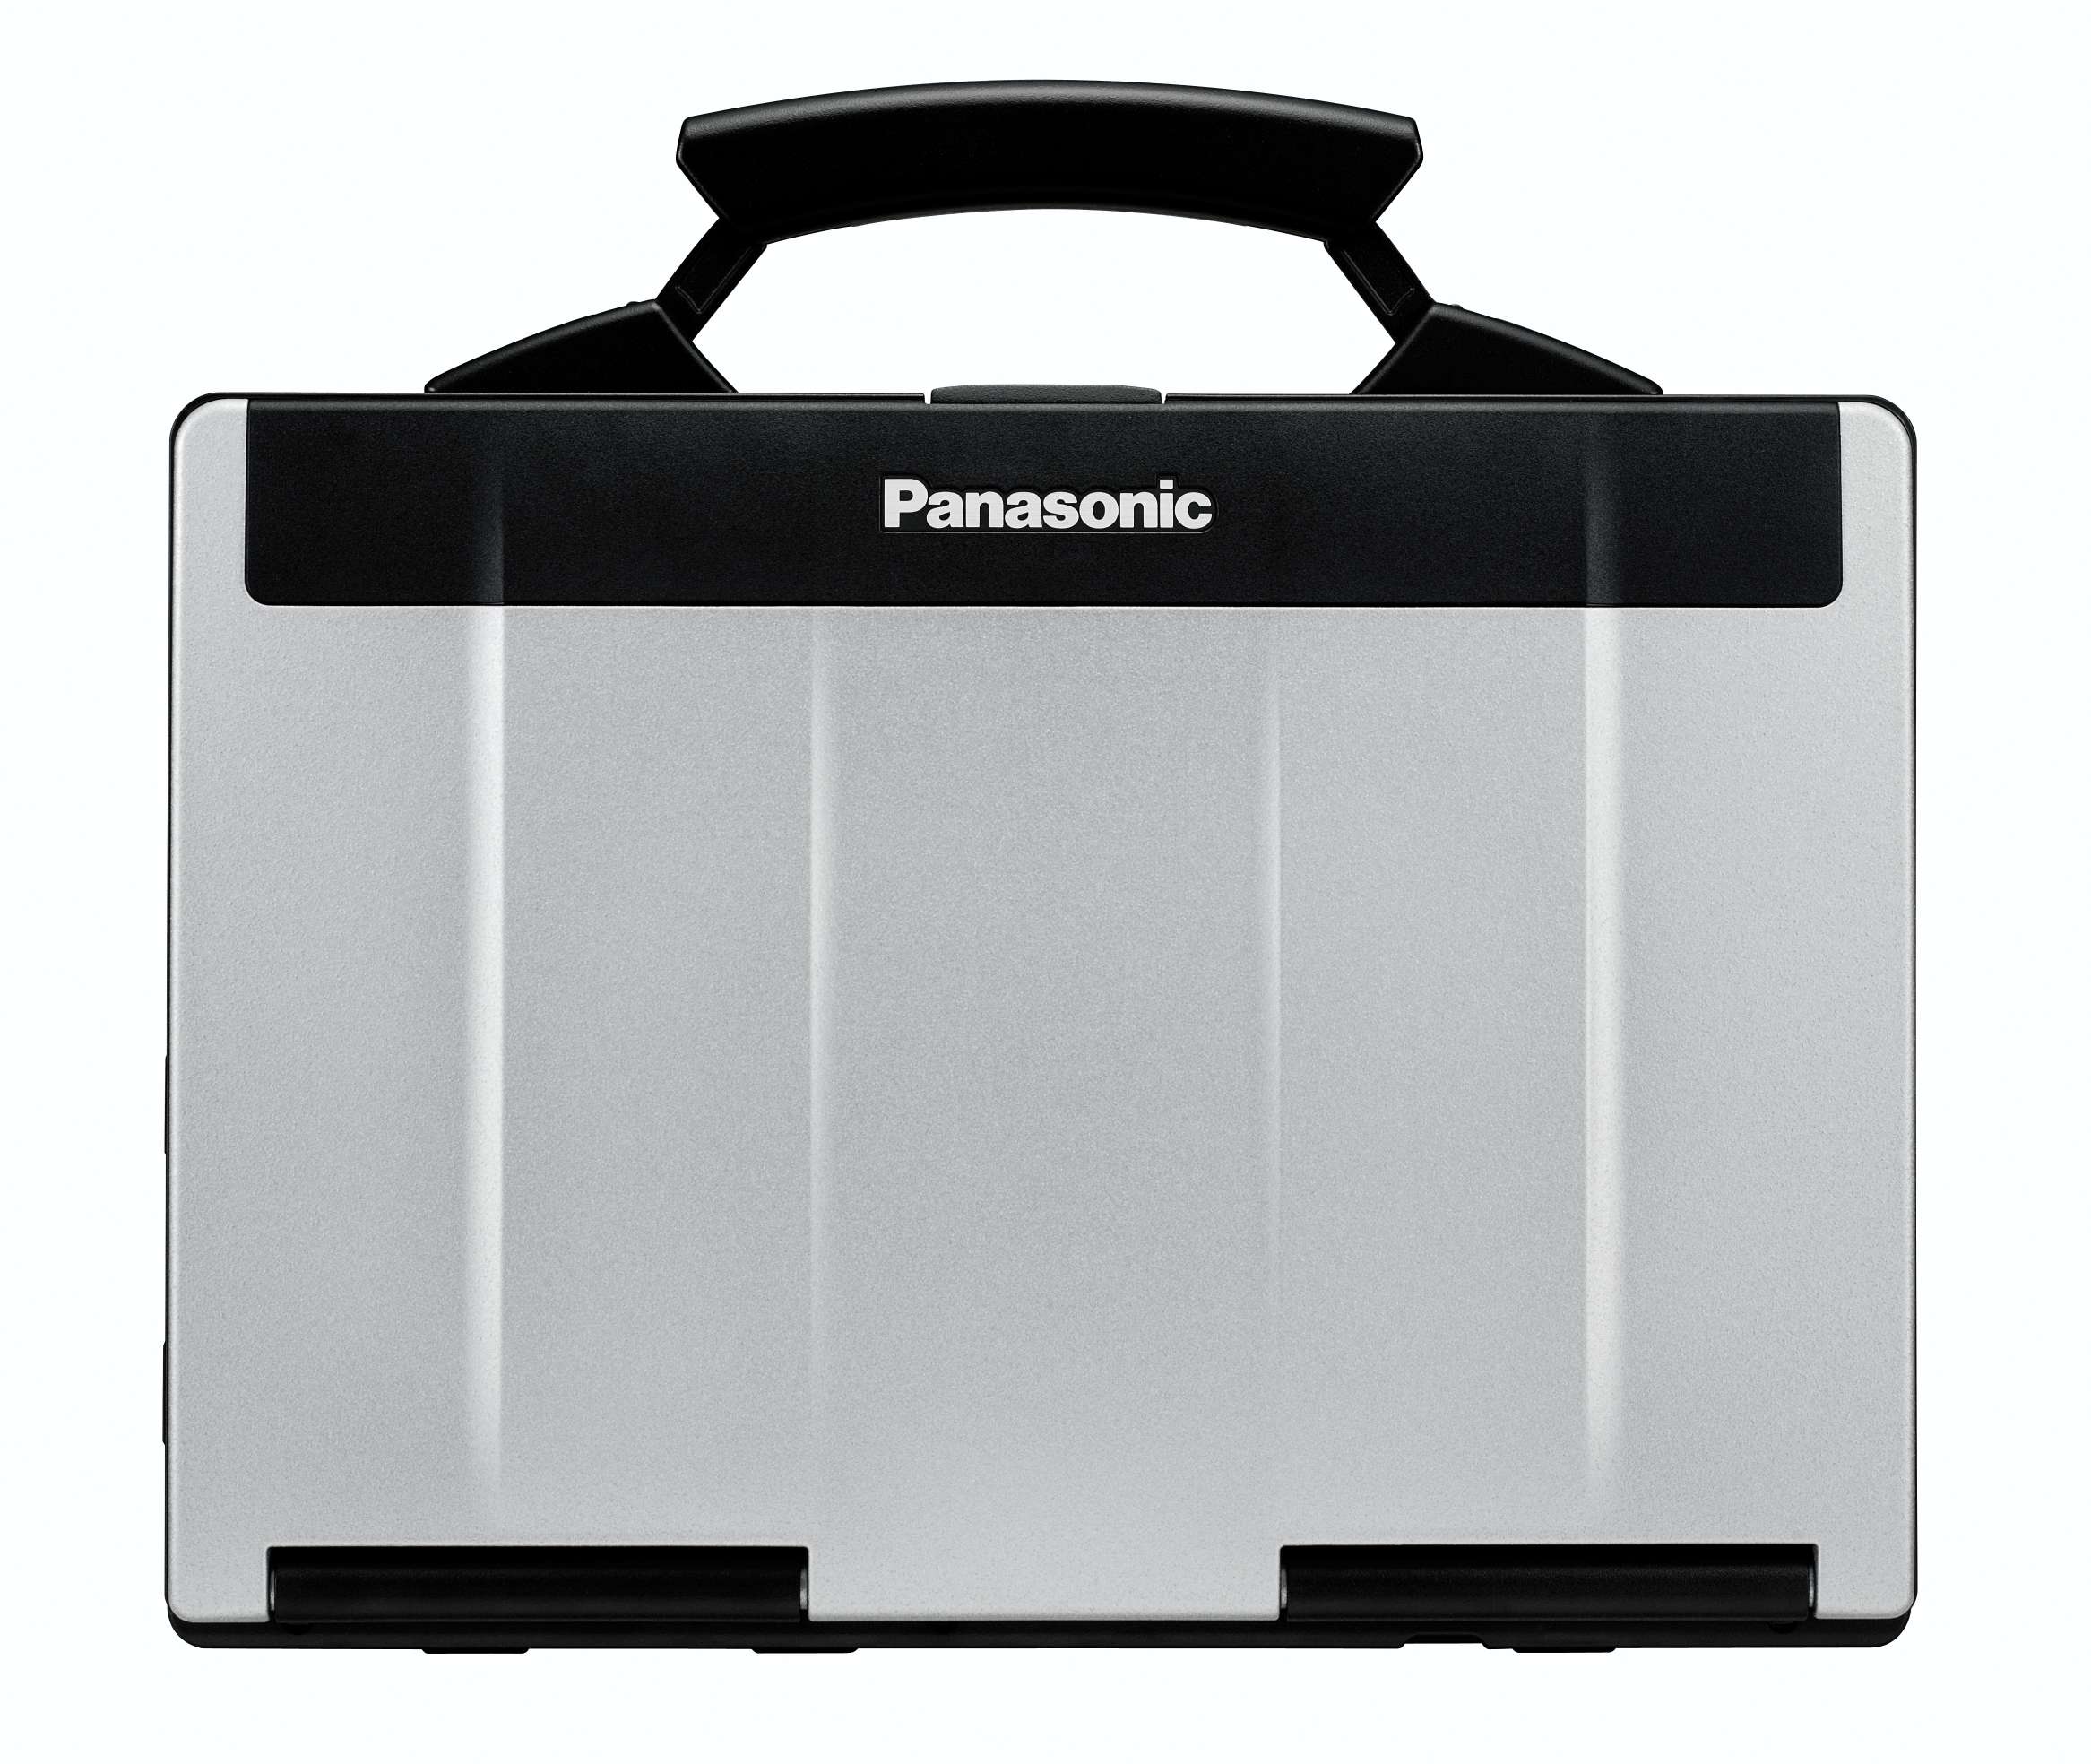 Used Panasonic A Grade CF-53 Toughbook 14-inch (High Definition-720p LED 1366 x 768) 2.1GHz Core i5 250GB HD 2 GB Memory Win 7 Pro OS Power Adapter Included - image 3 of 3